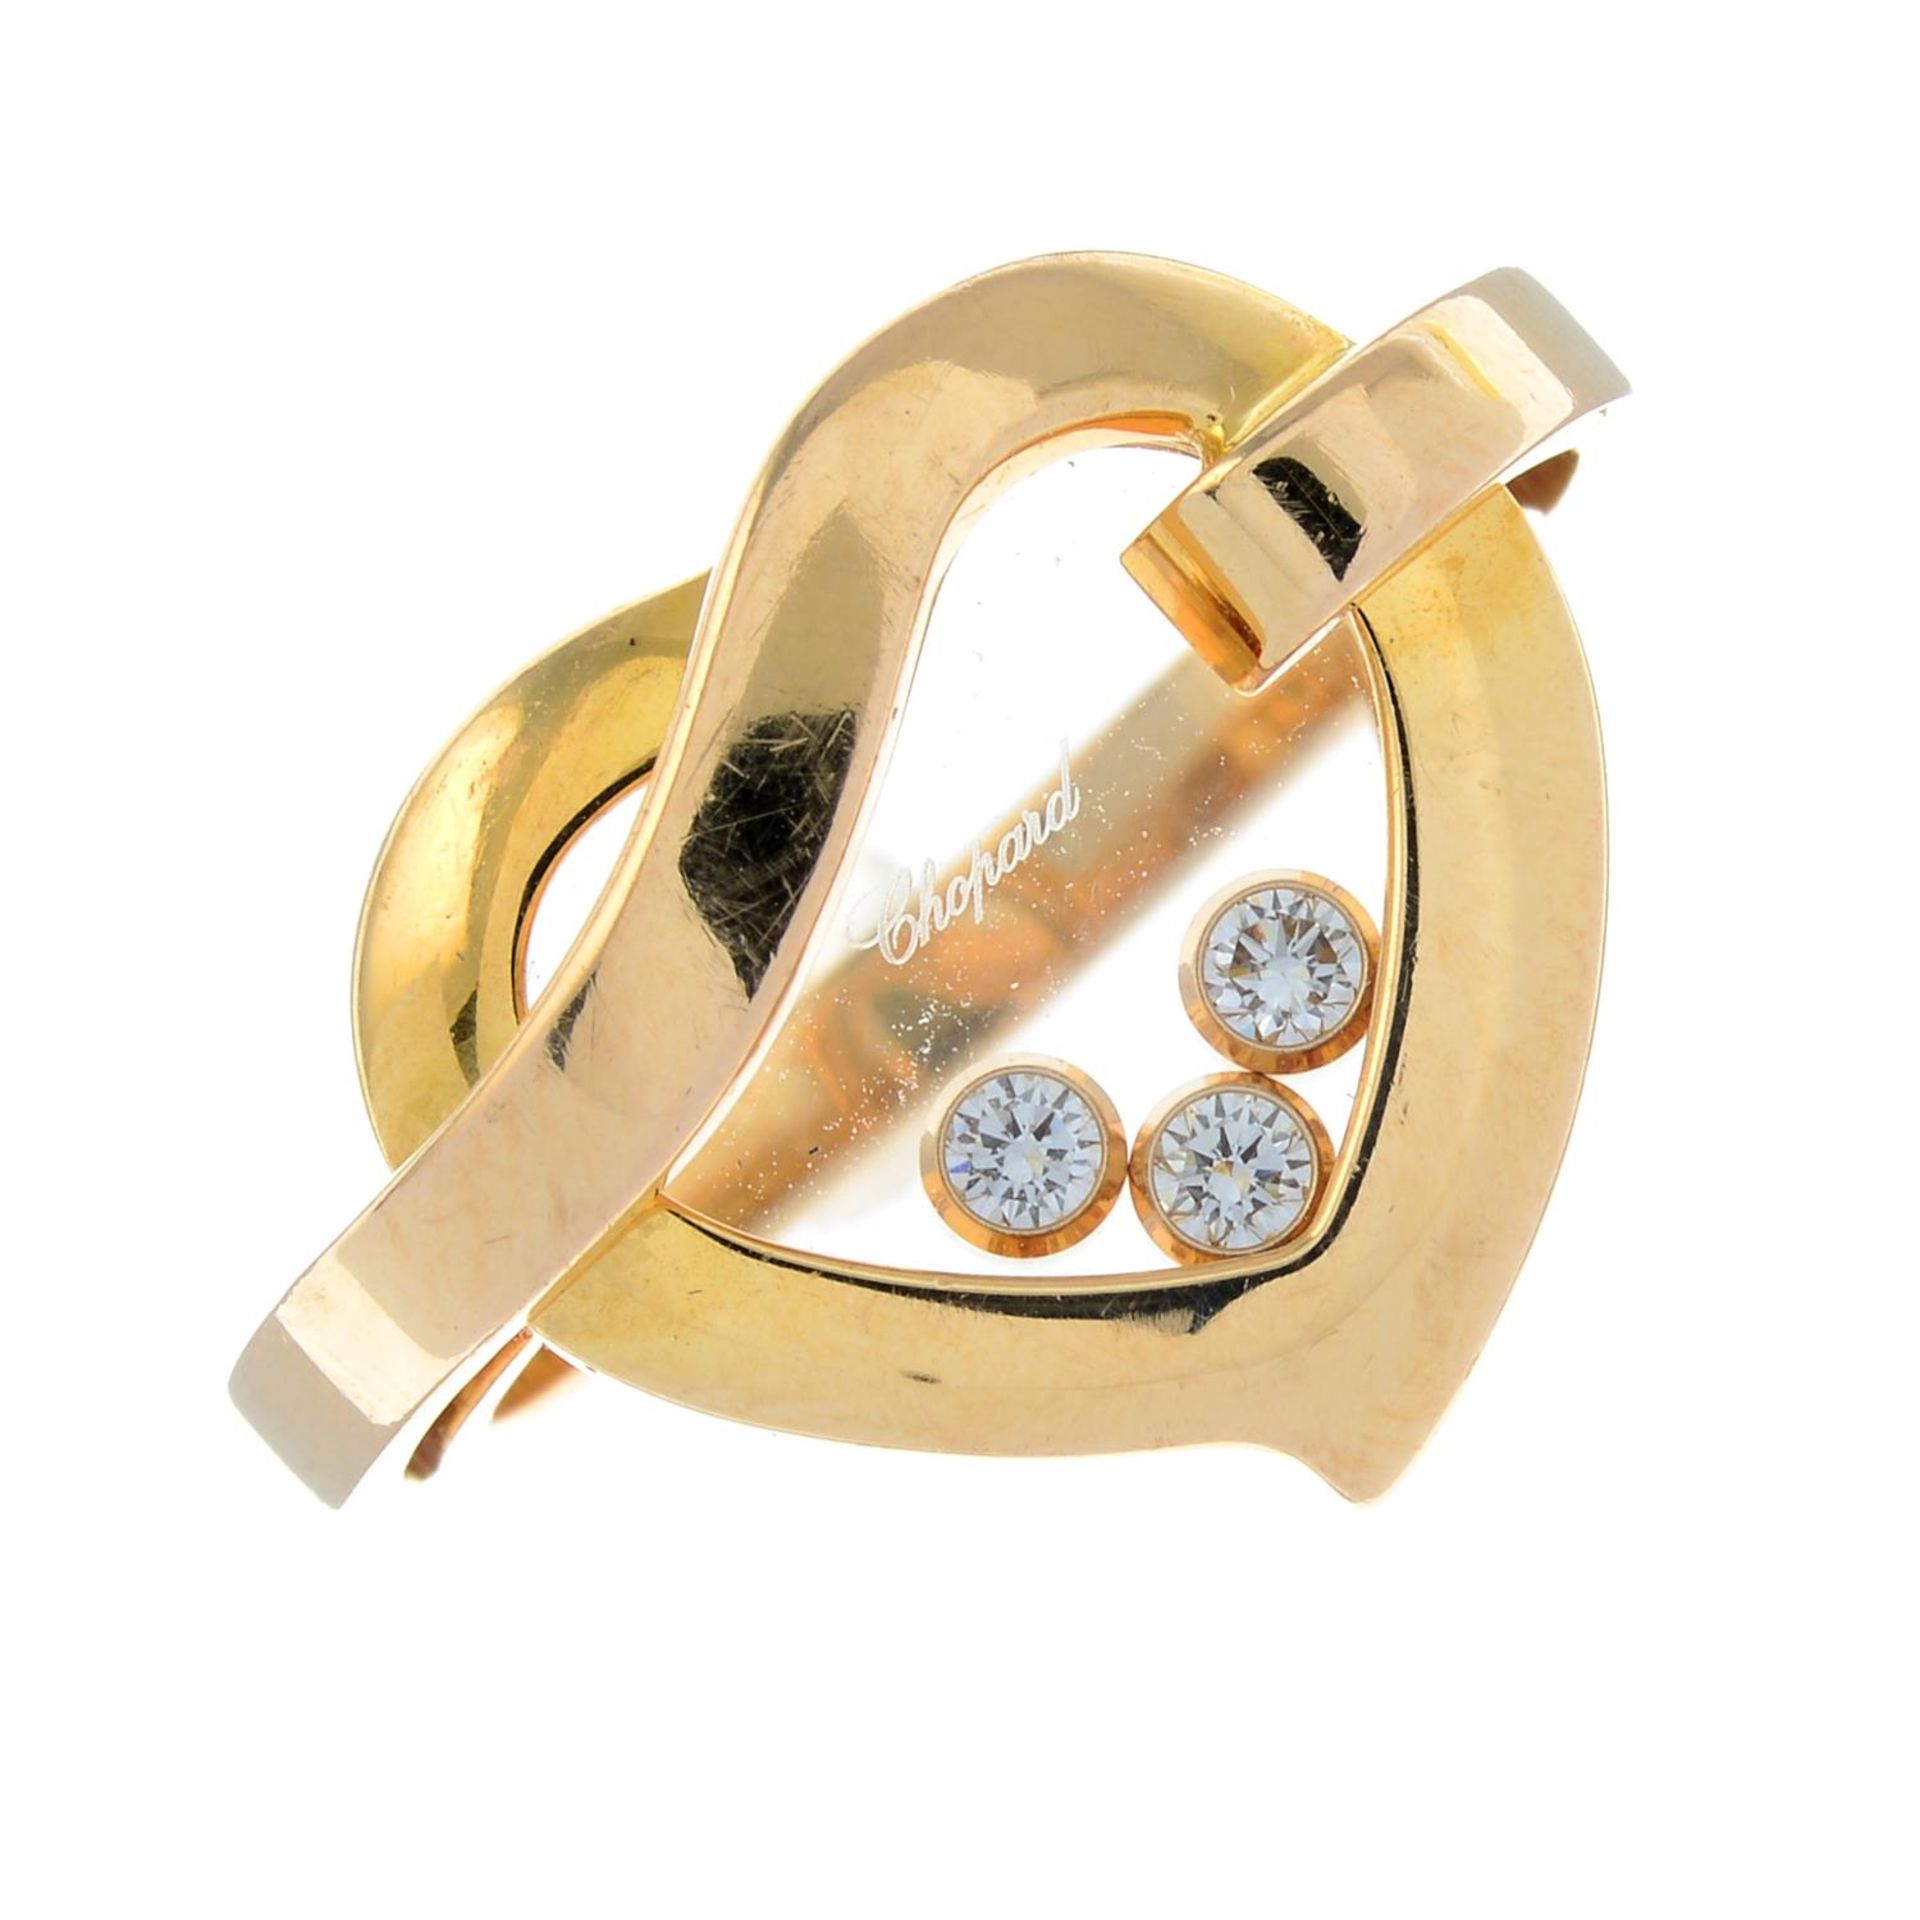 An 18ct gold 'Happy Diamonds' heart ring, by Chopard. - Image 2 of 5